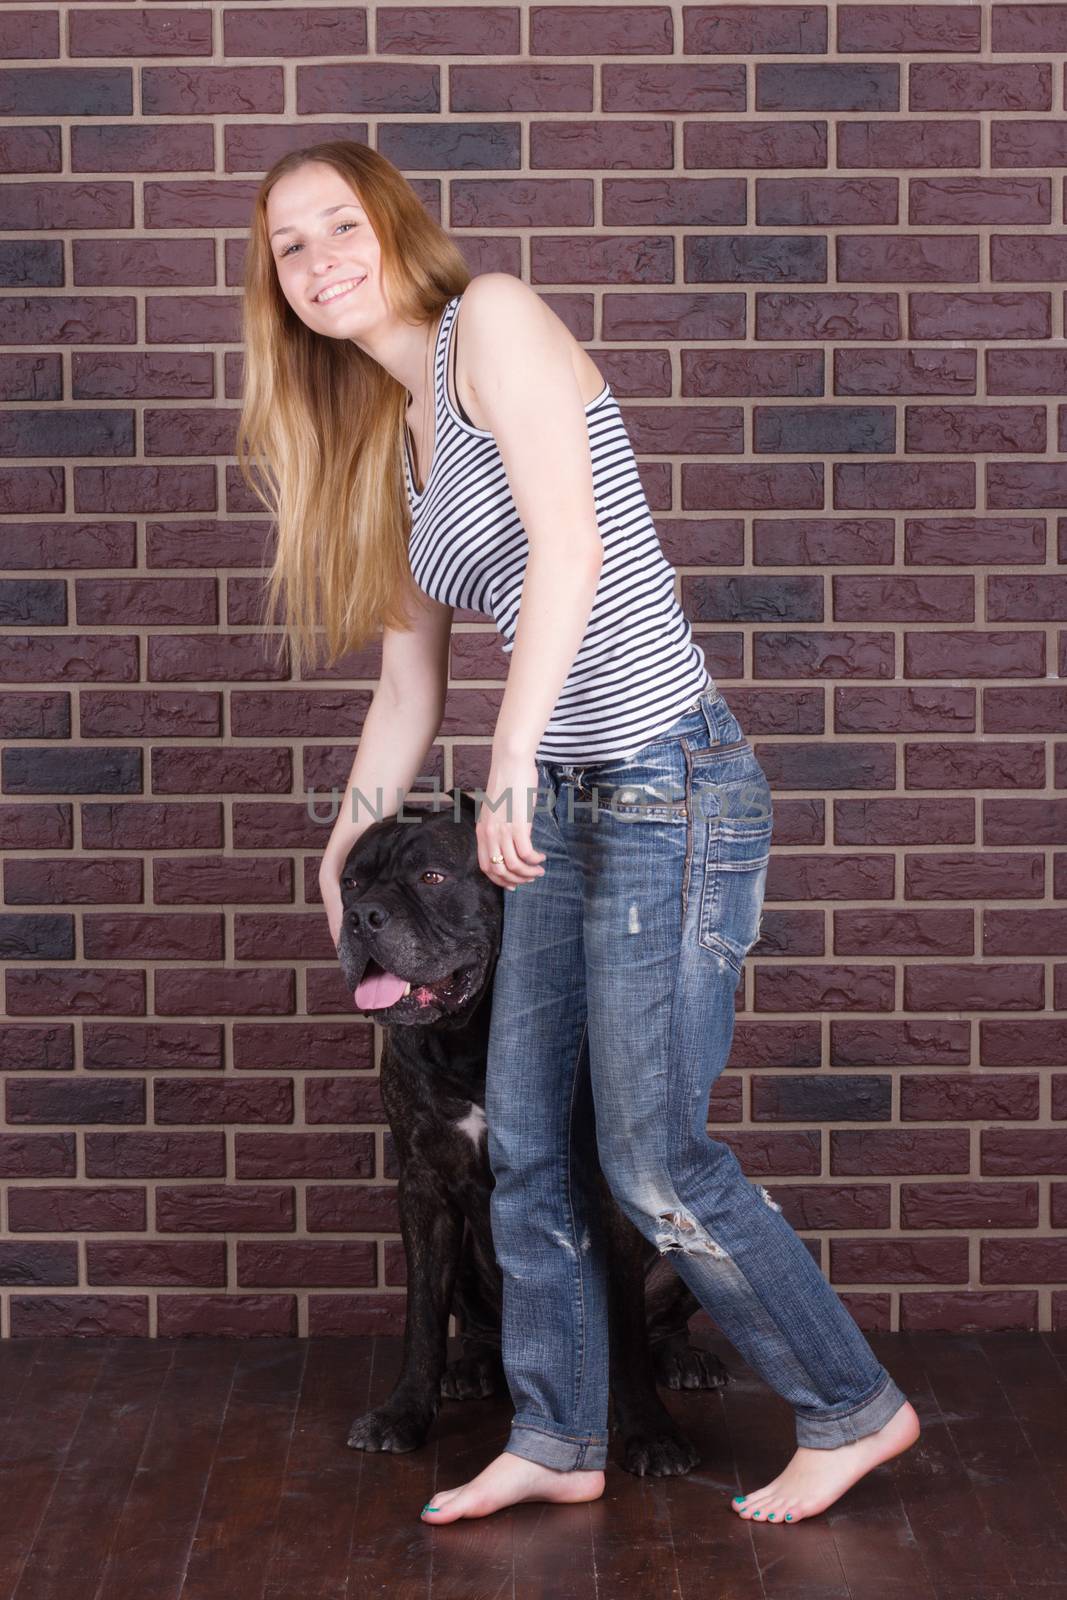 girl in jeans standing near the wall and hugging a dog Cane Corso by victosha